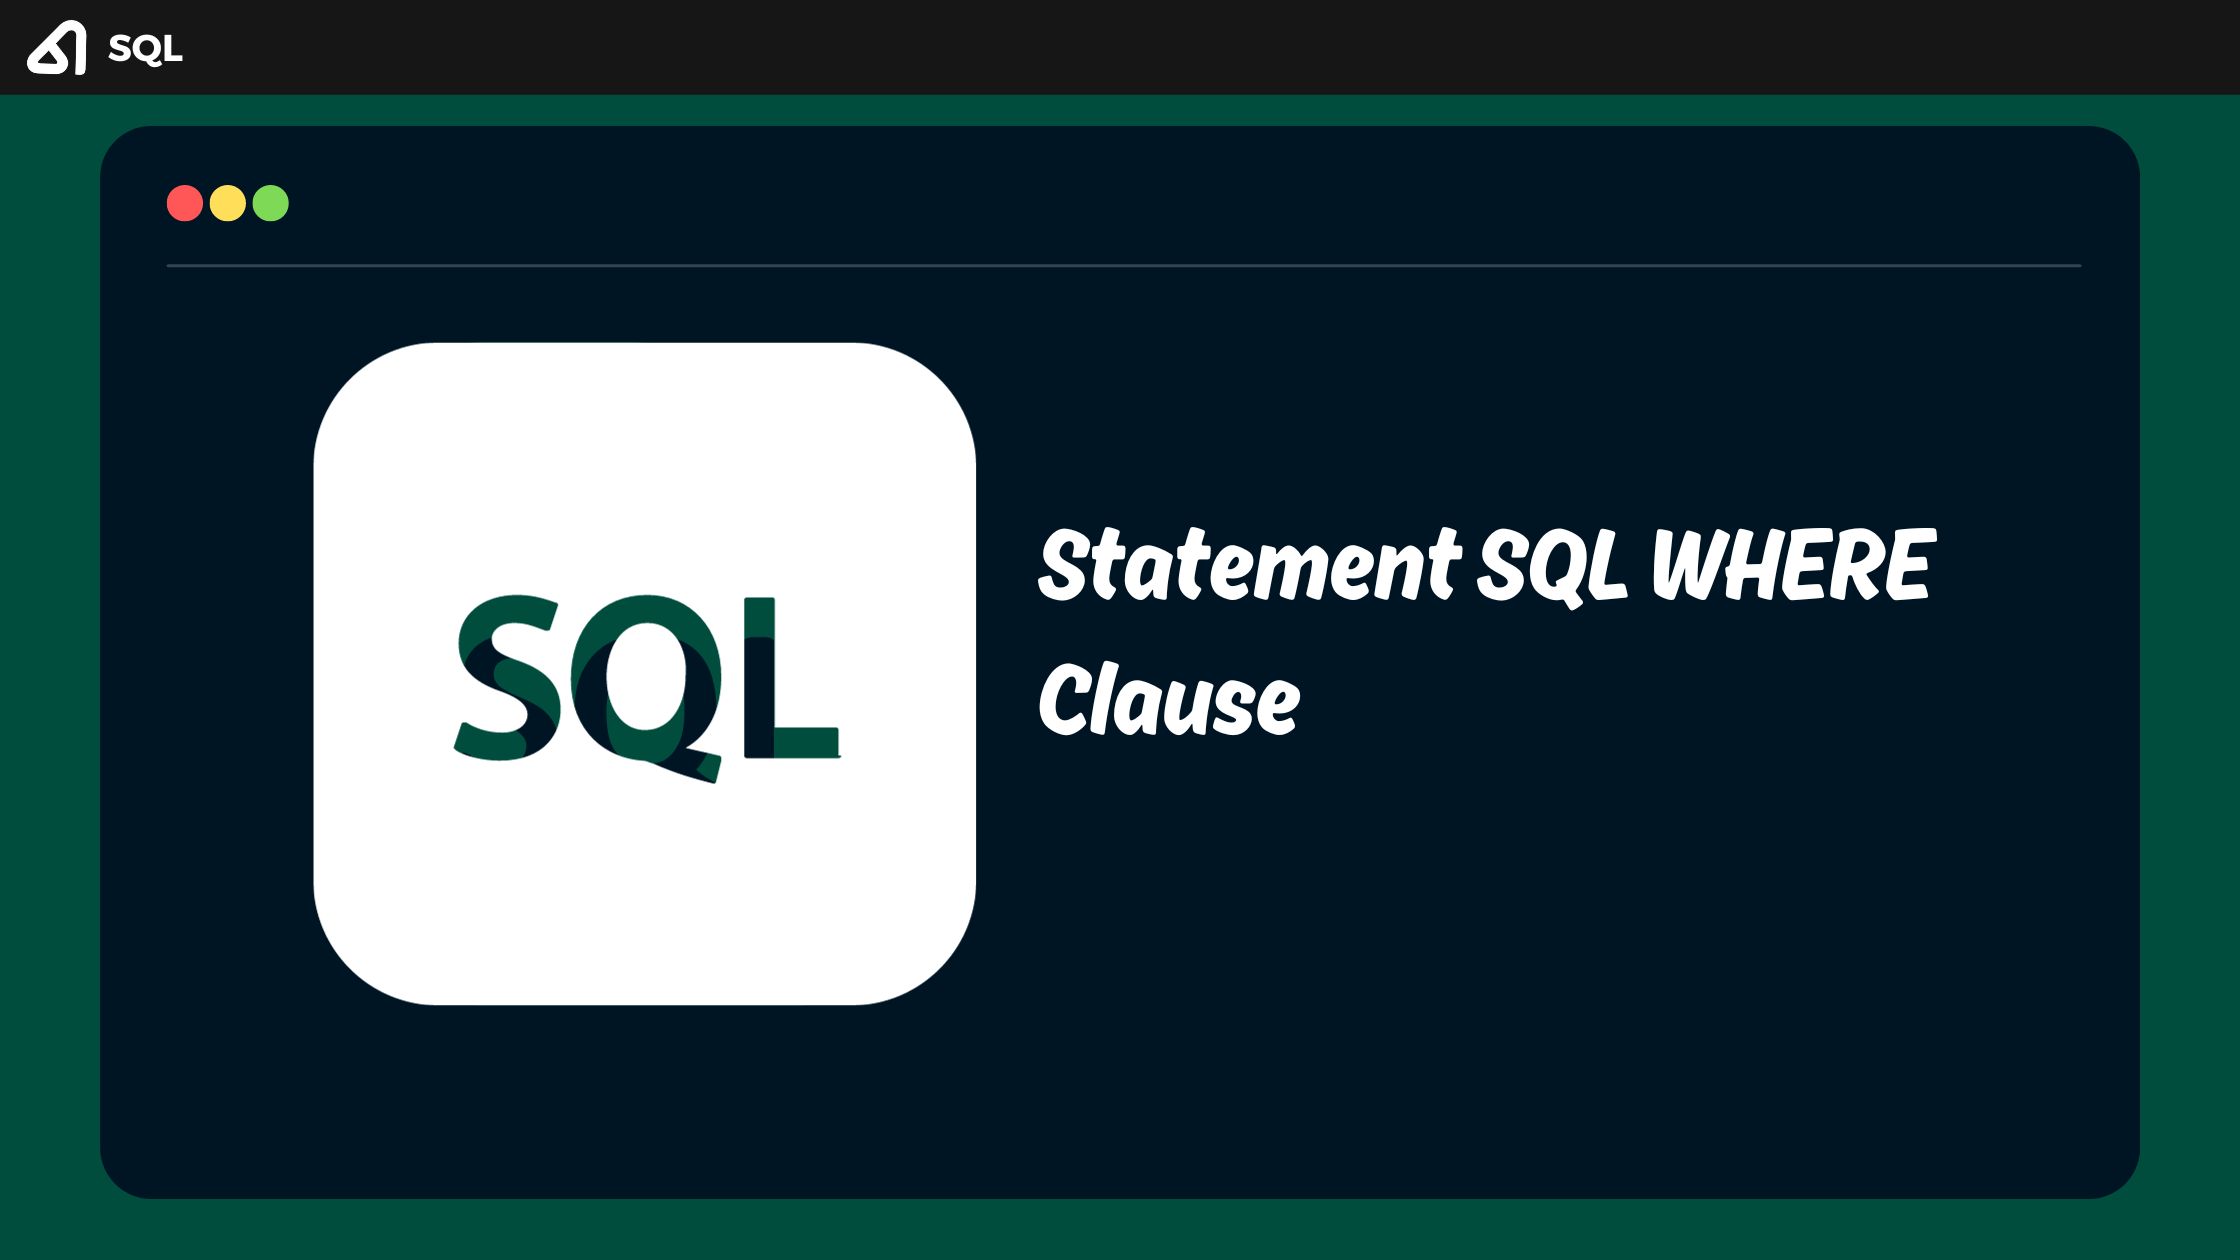 Statement SQL WHERE Clause